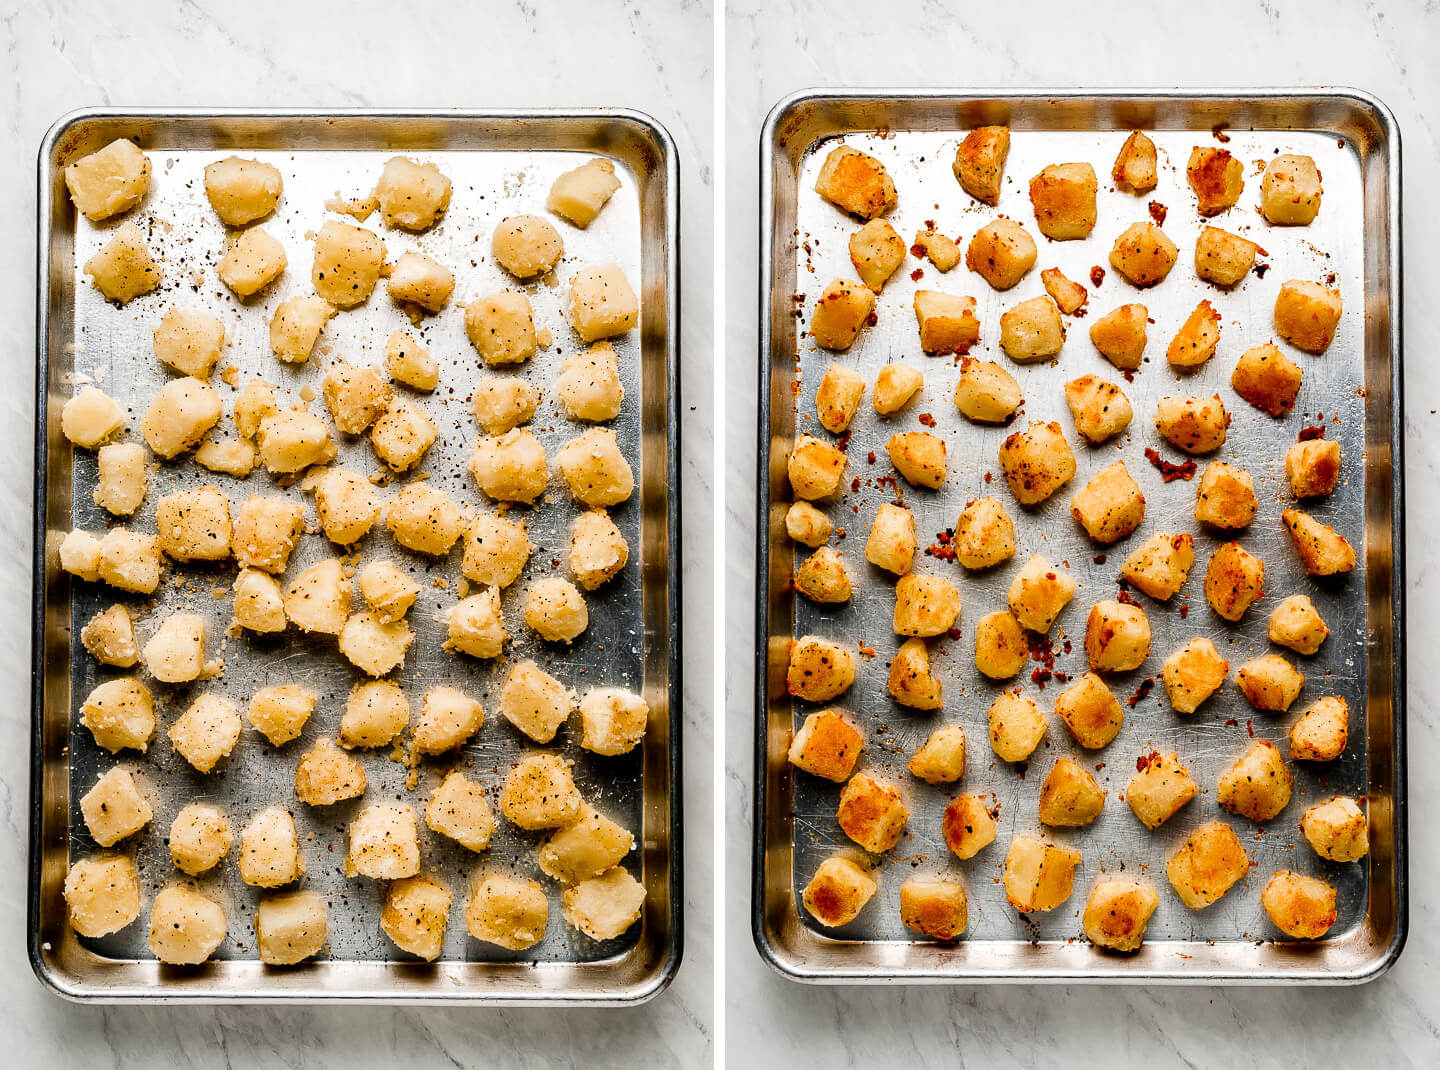 Diptych- Sheet pan with cut and seasoned parboiled potatoes; same potatoes baked.